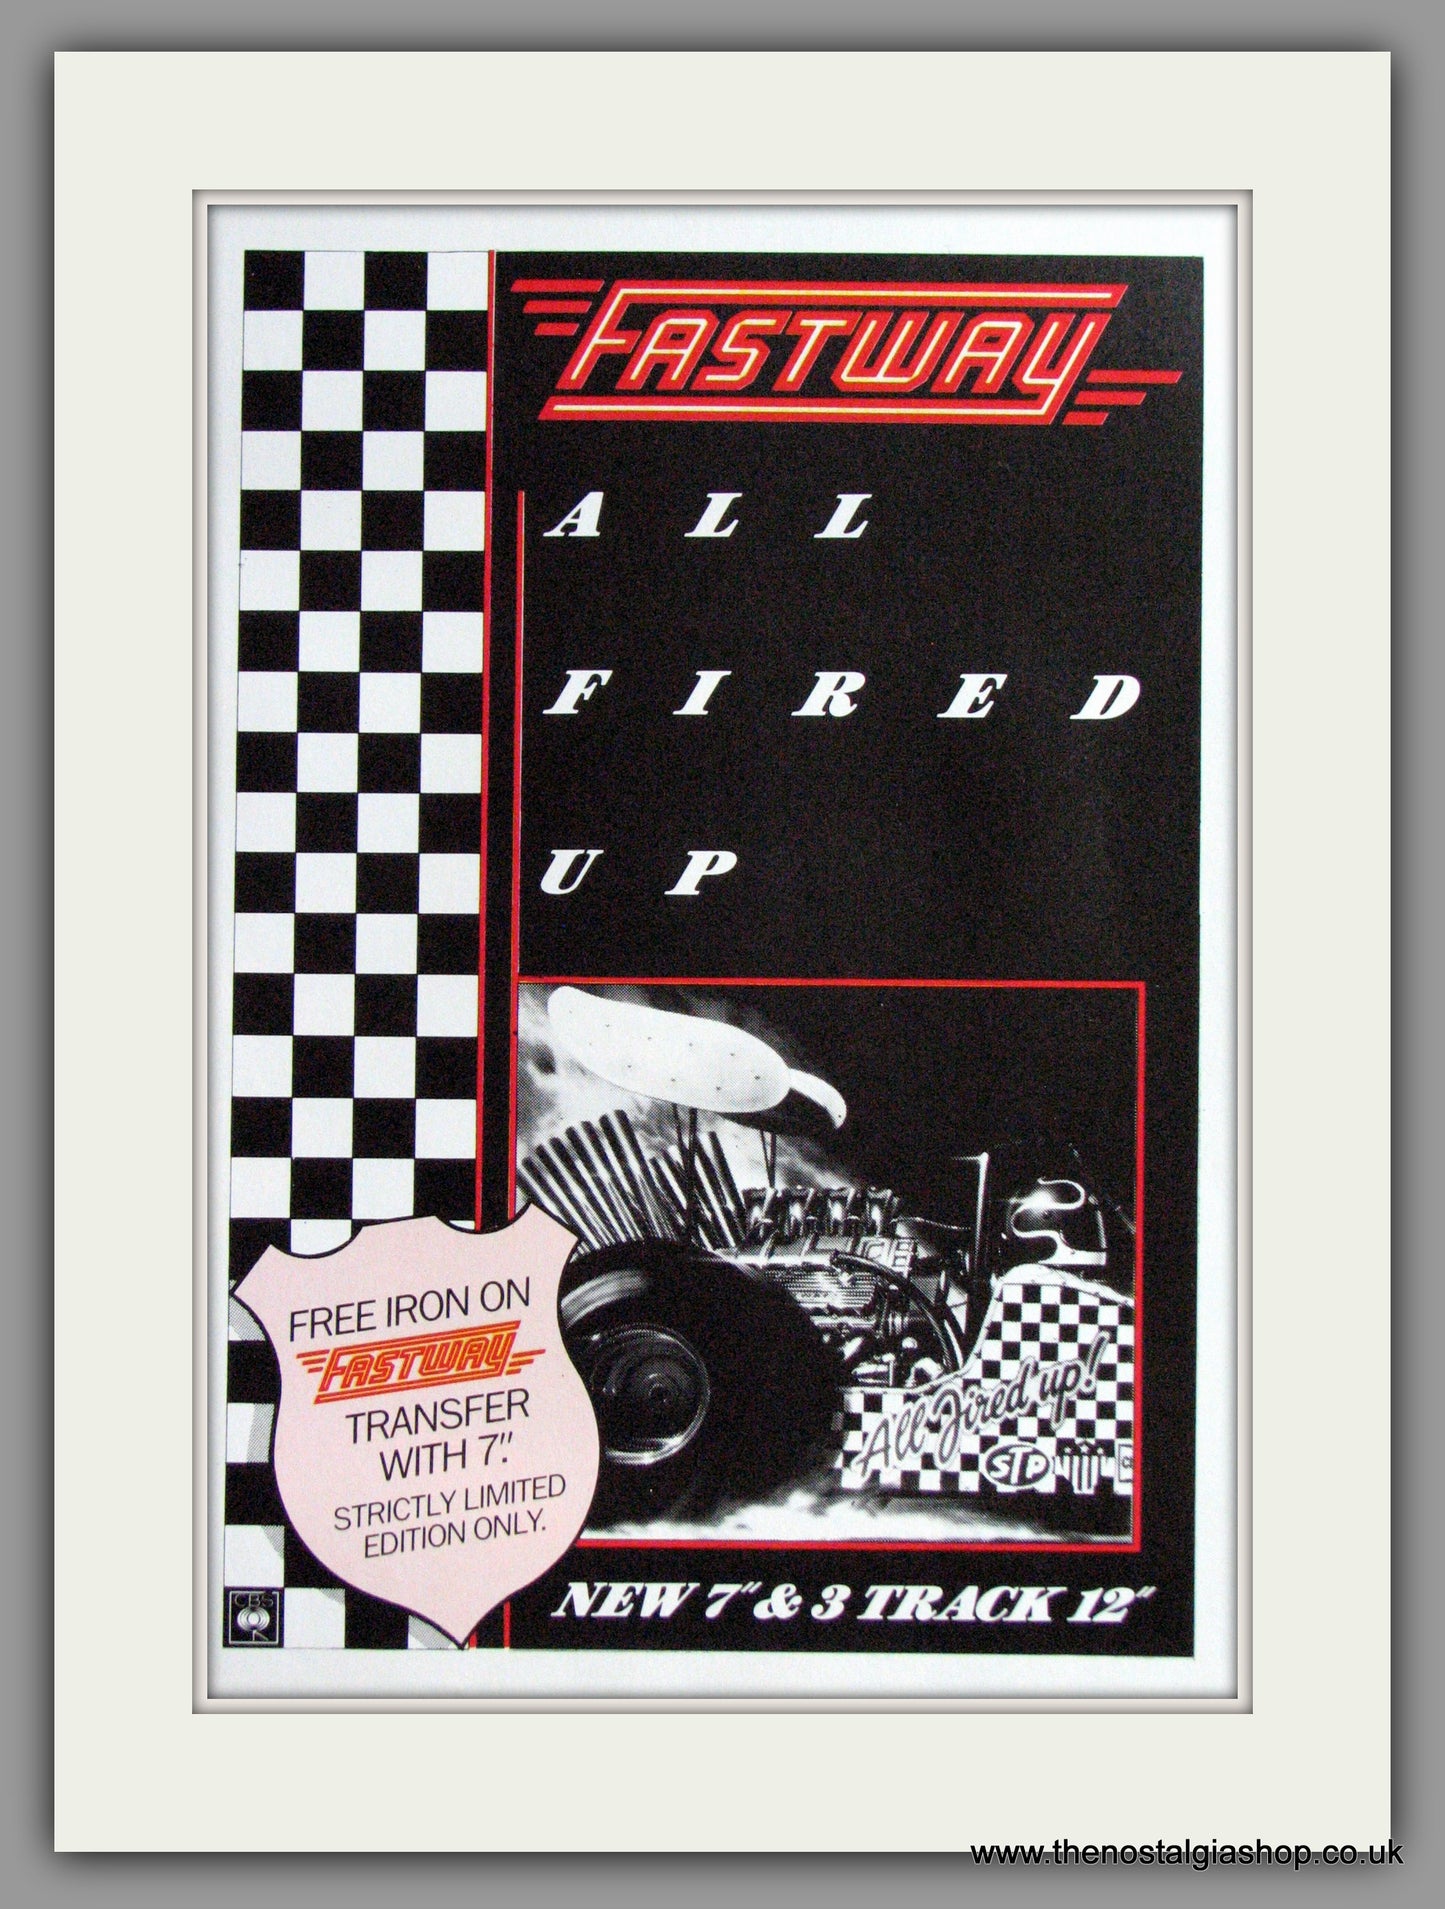 Fastway - All Fired Up. Original Advert 1984 (ref AD50296)